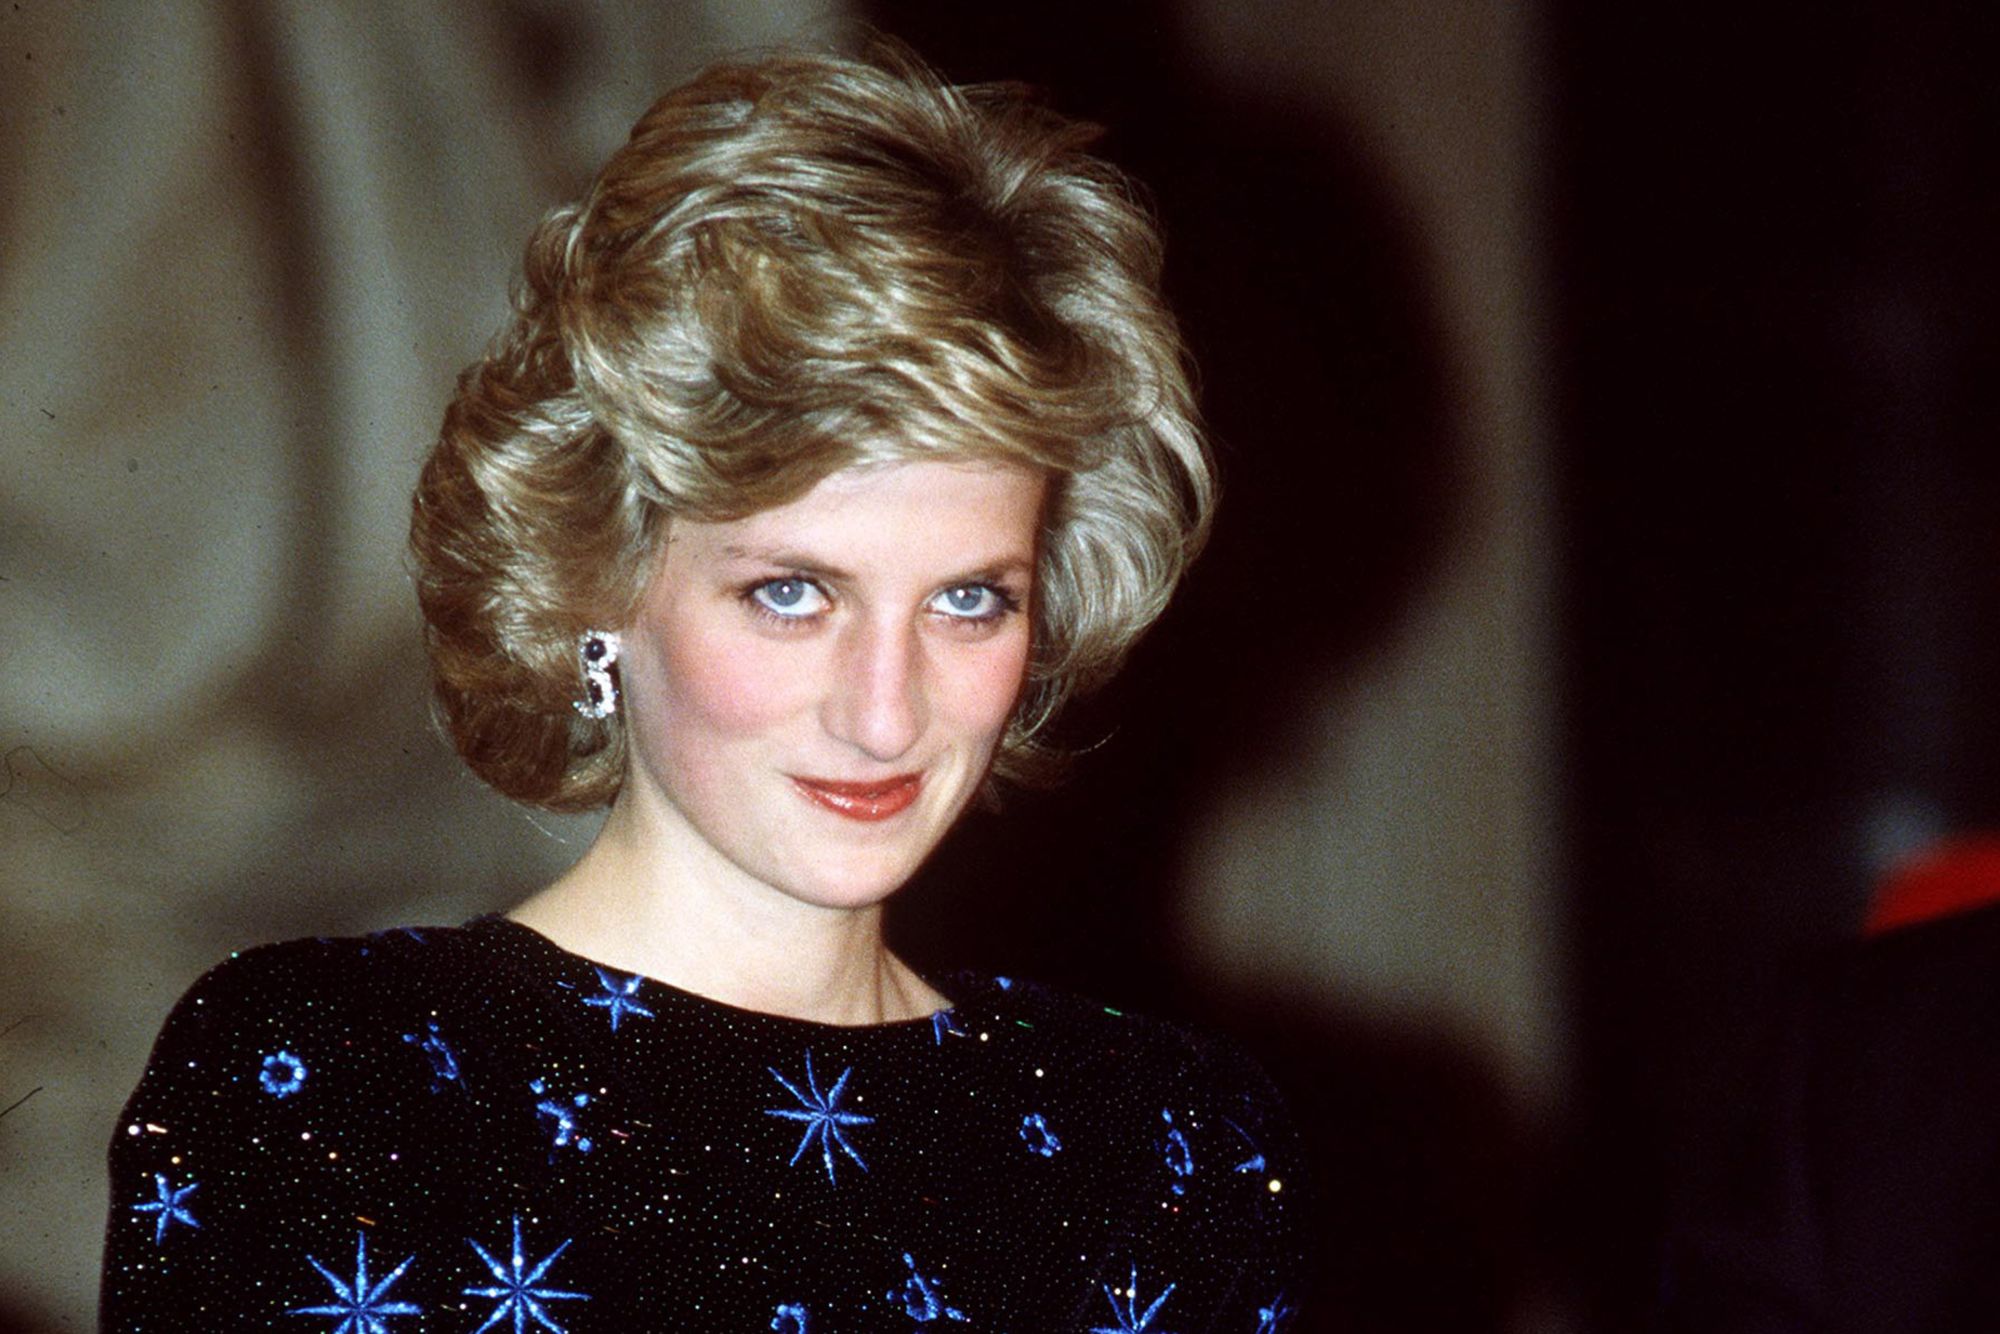 Princess evening fetches at | CNN dress auction record Diana\'s star-spangled million $1.148